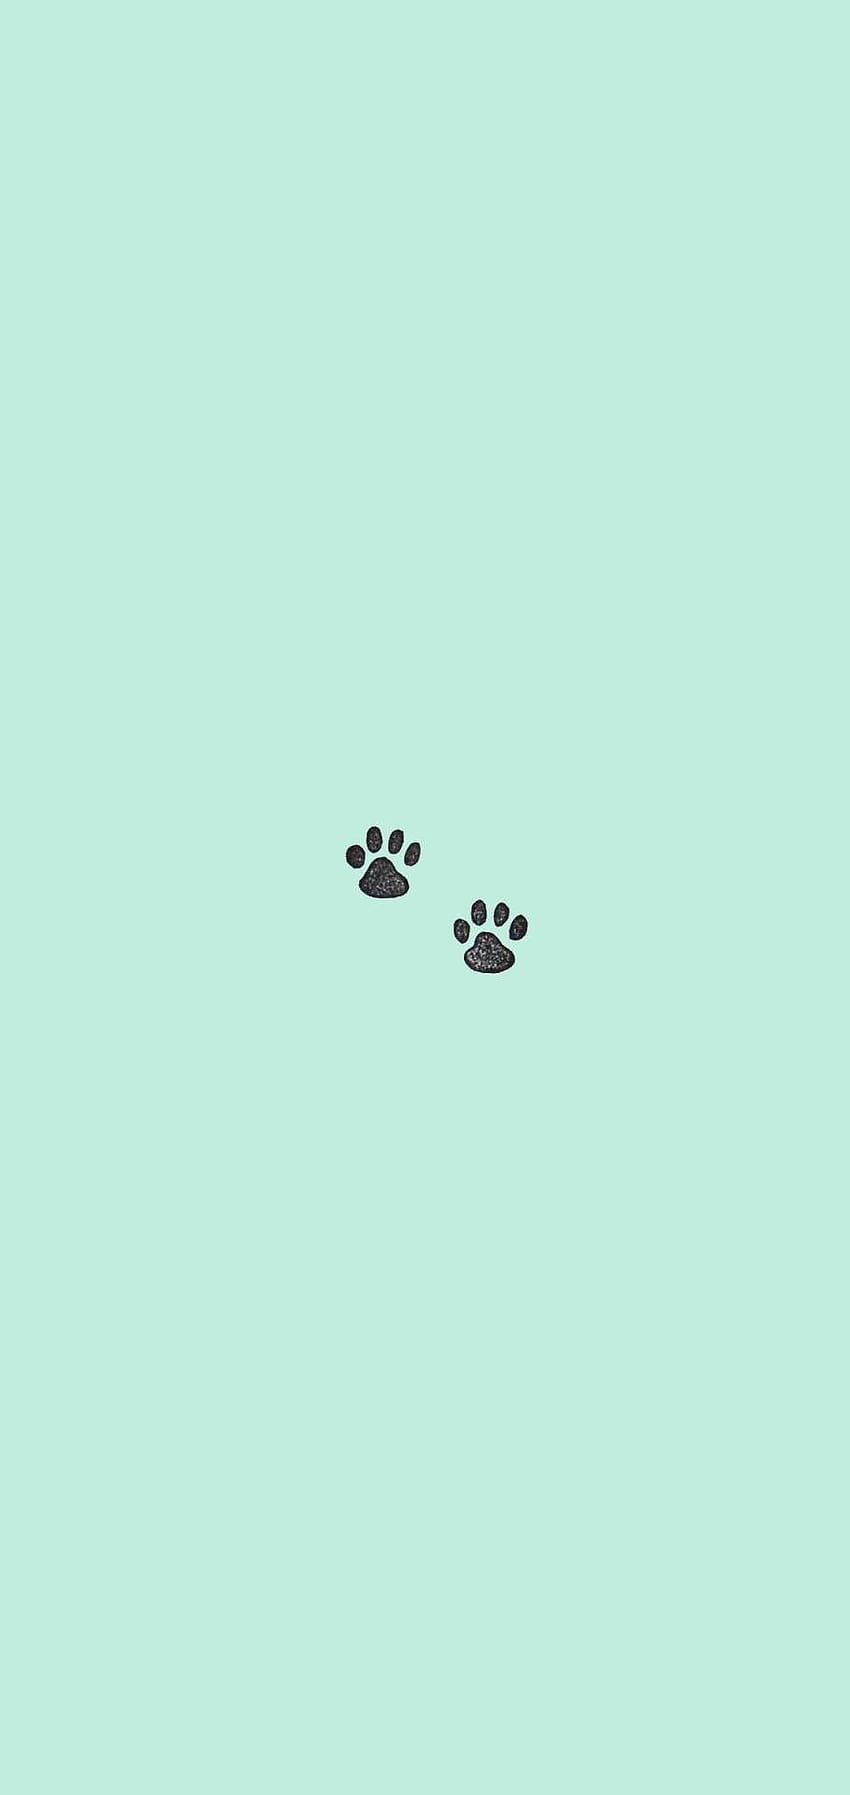 A pair of paw prints on green background - Turquoise